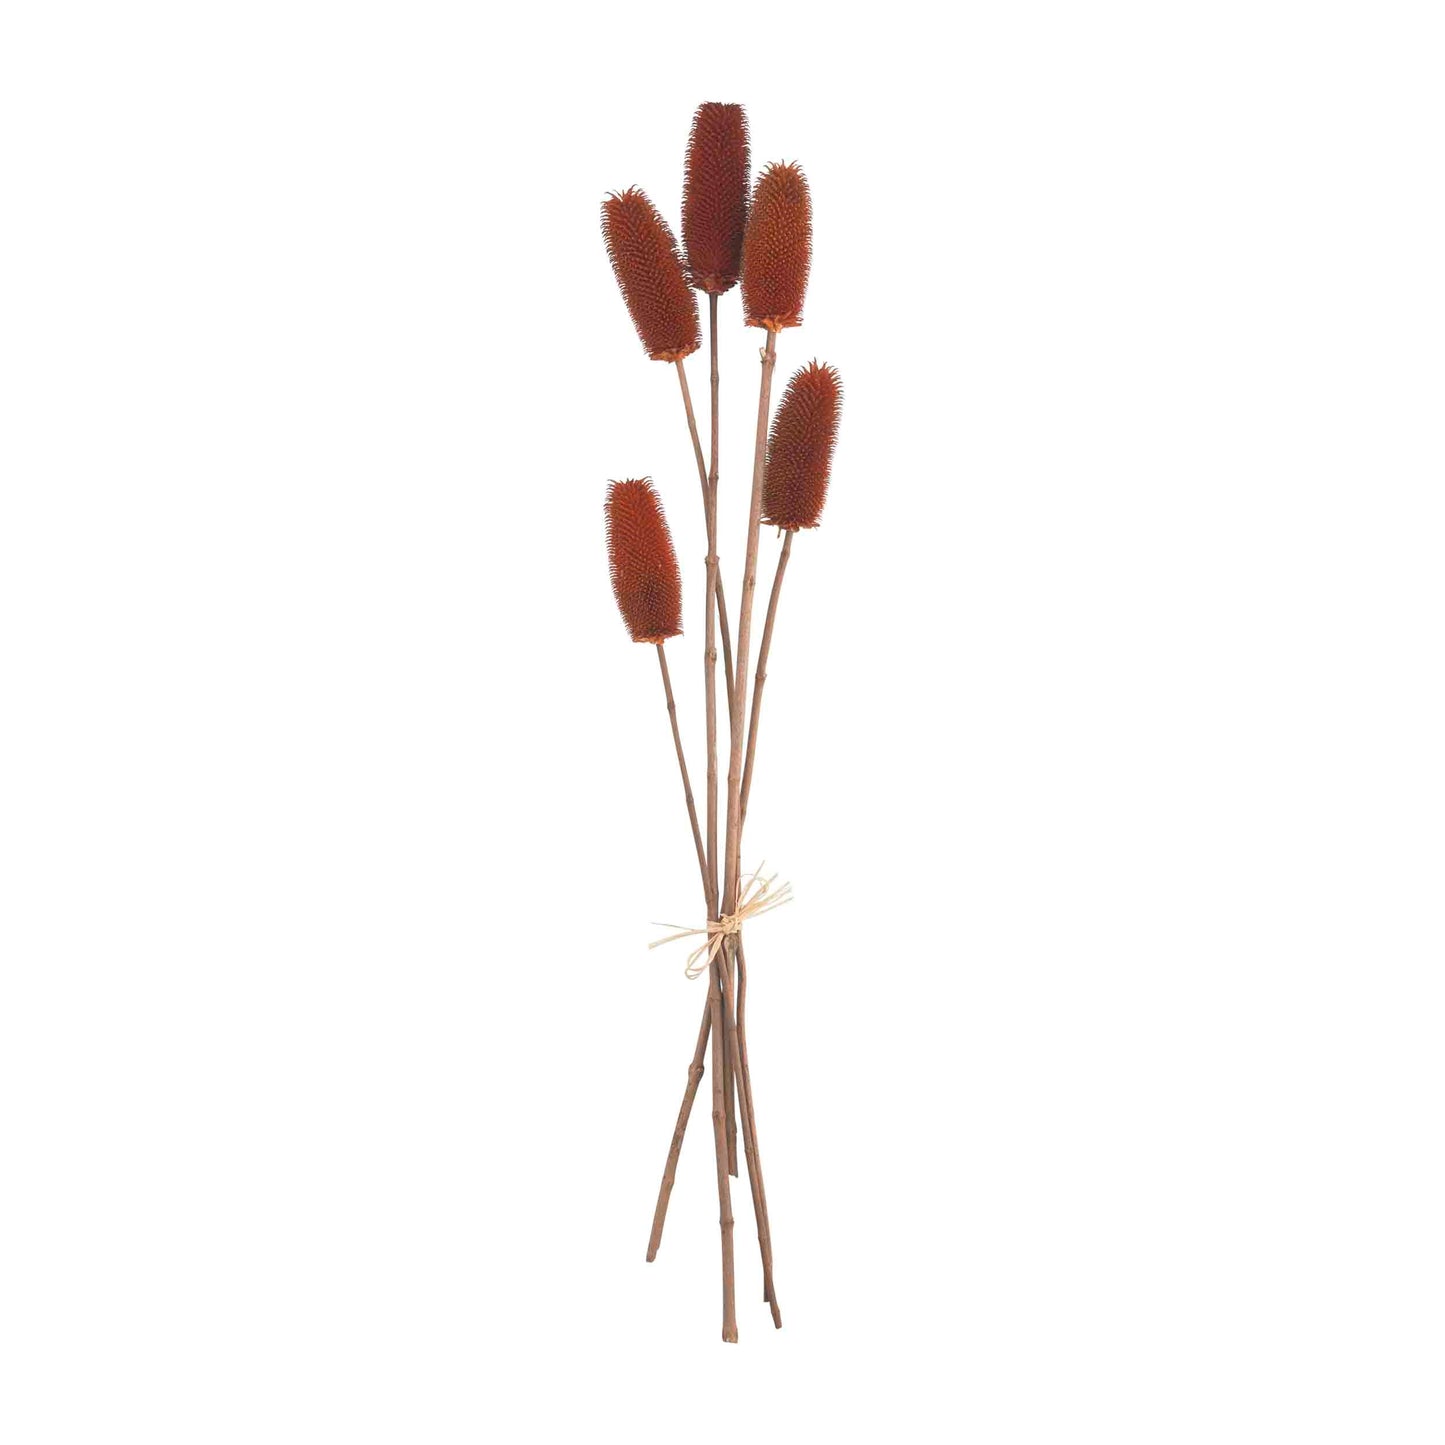 RUST AND BROWN THISTLE STEM BUNDLE